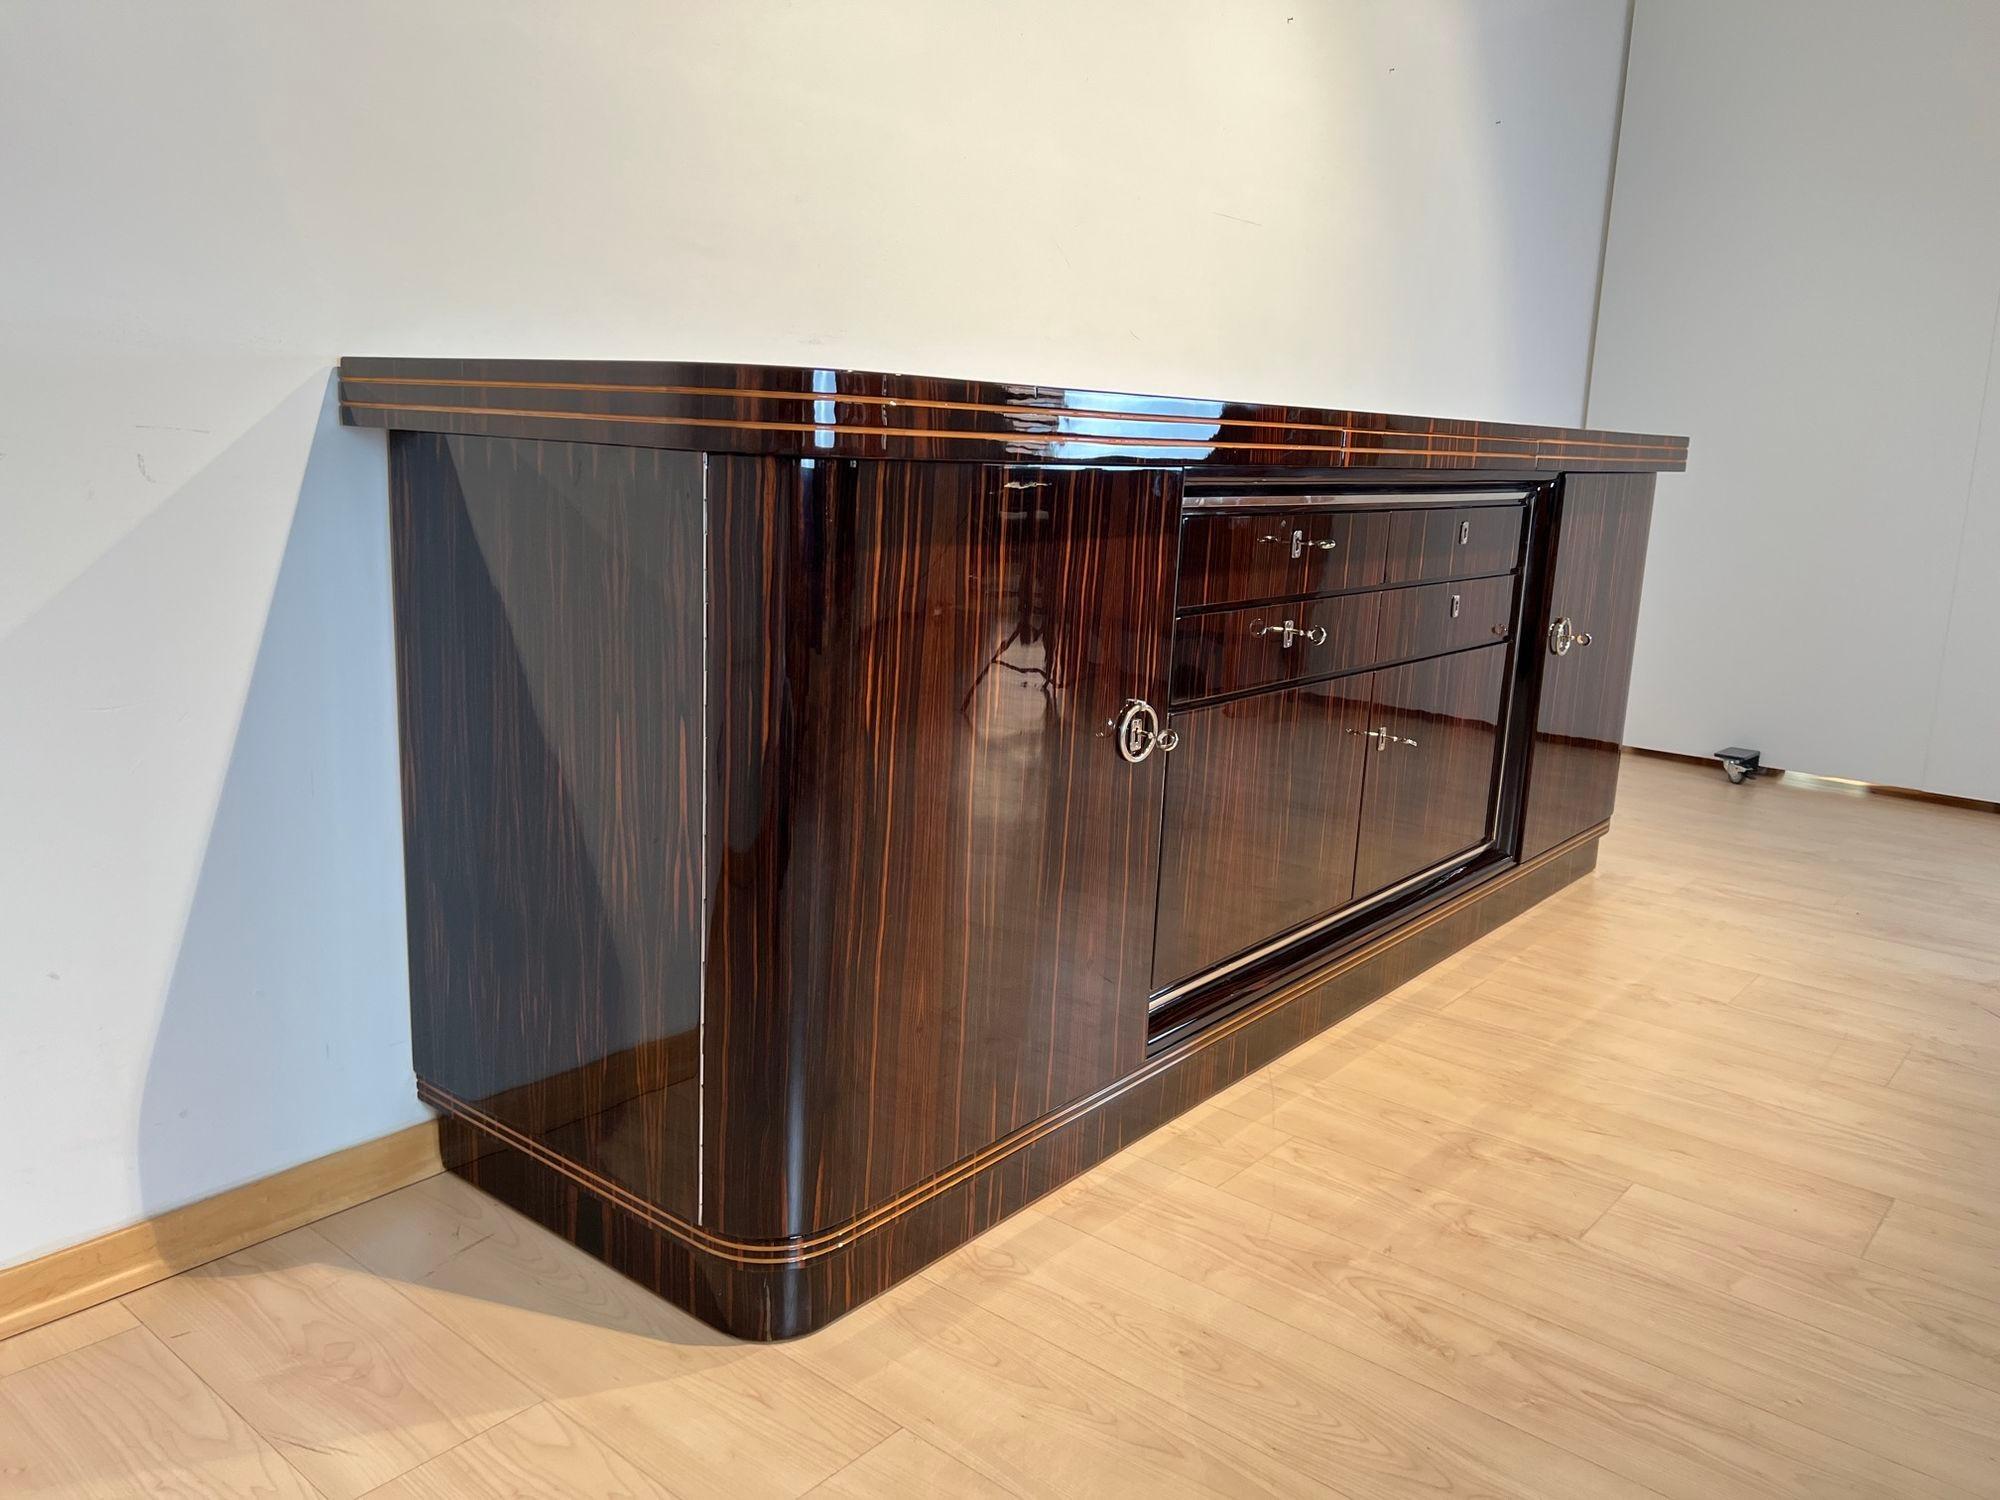 Lacquered Large Art Deco Sideboard, Macassar Ebony, Maple, Chrome, France circa 1930 For Sale